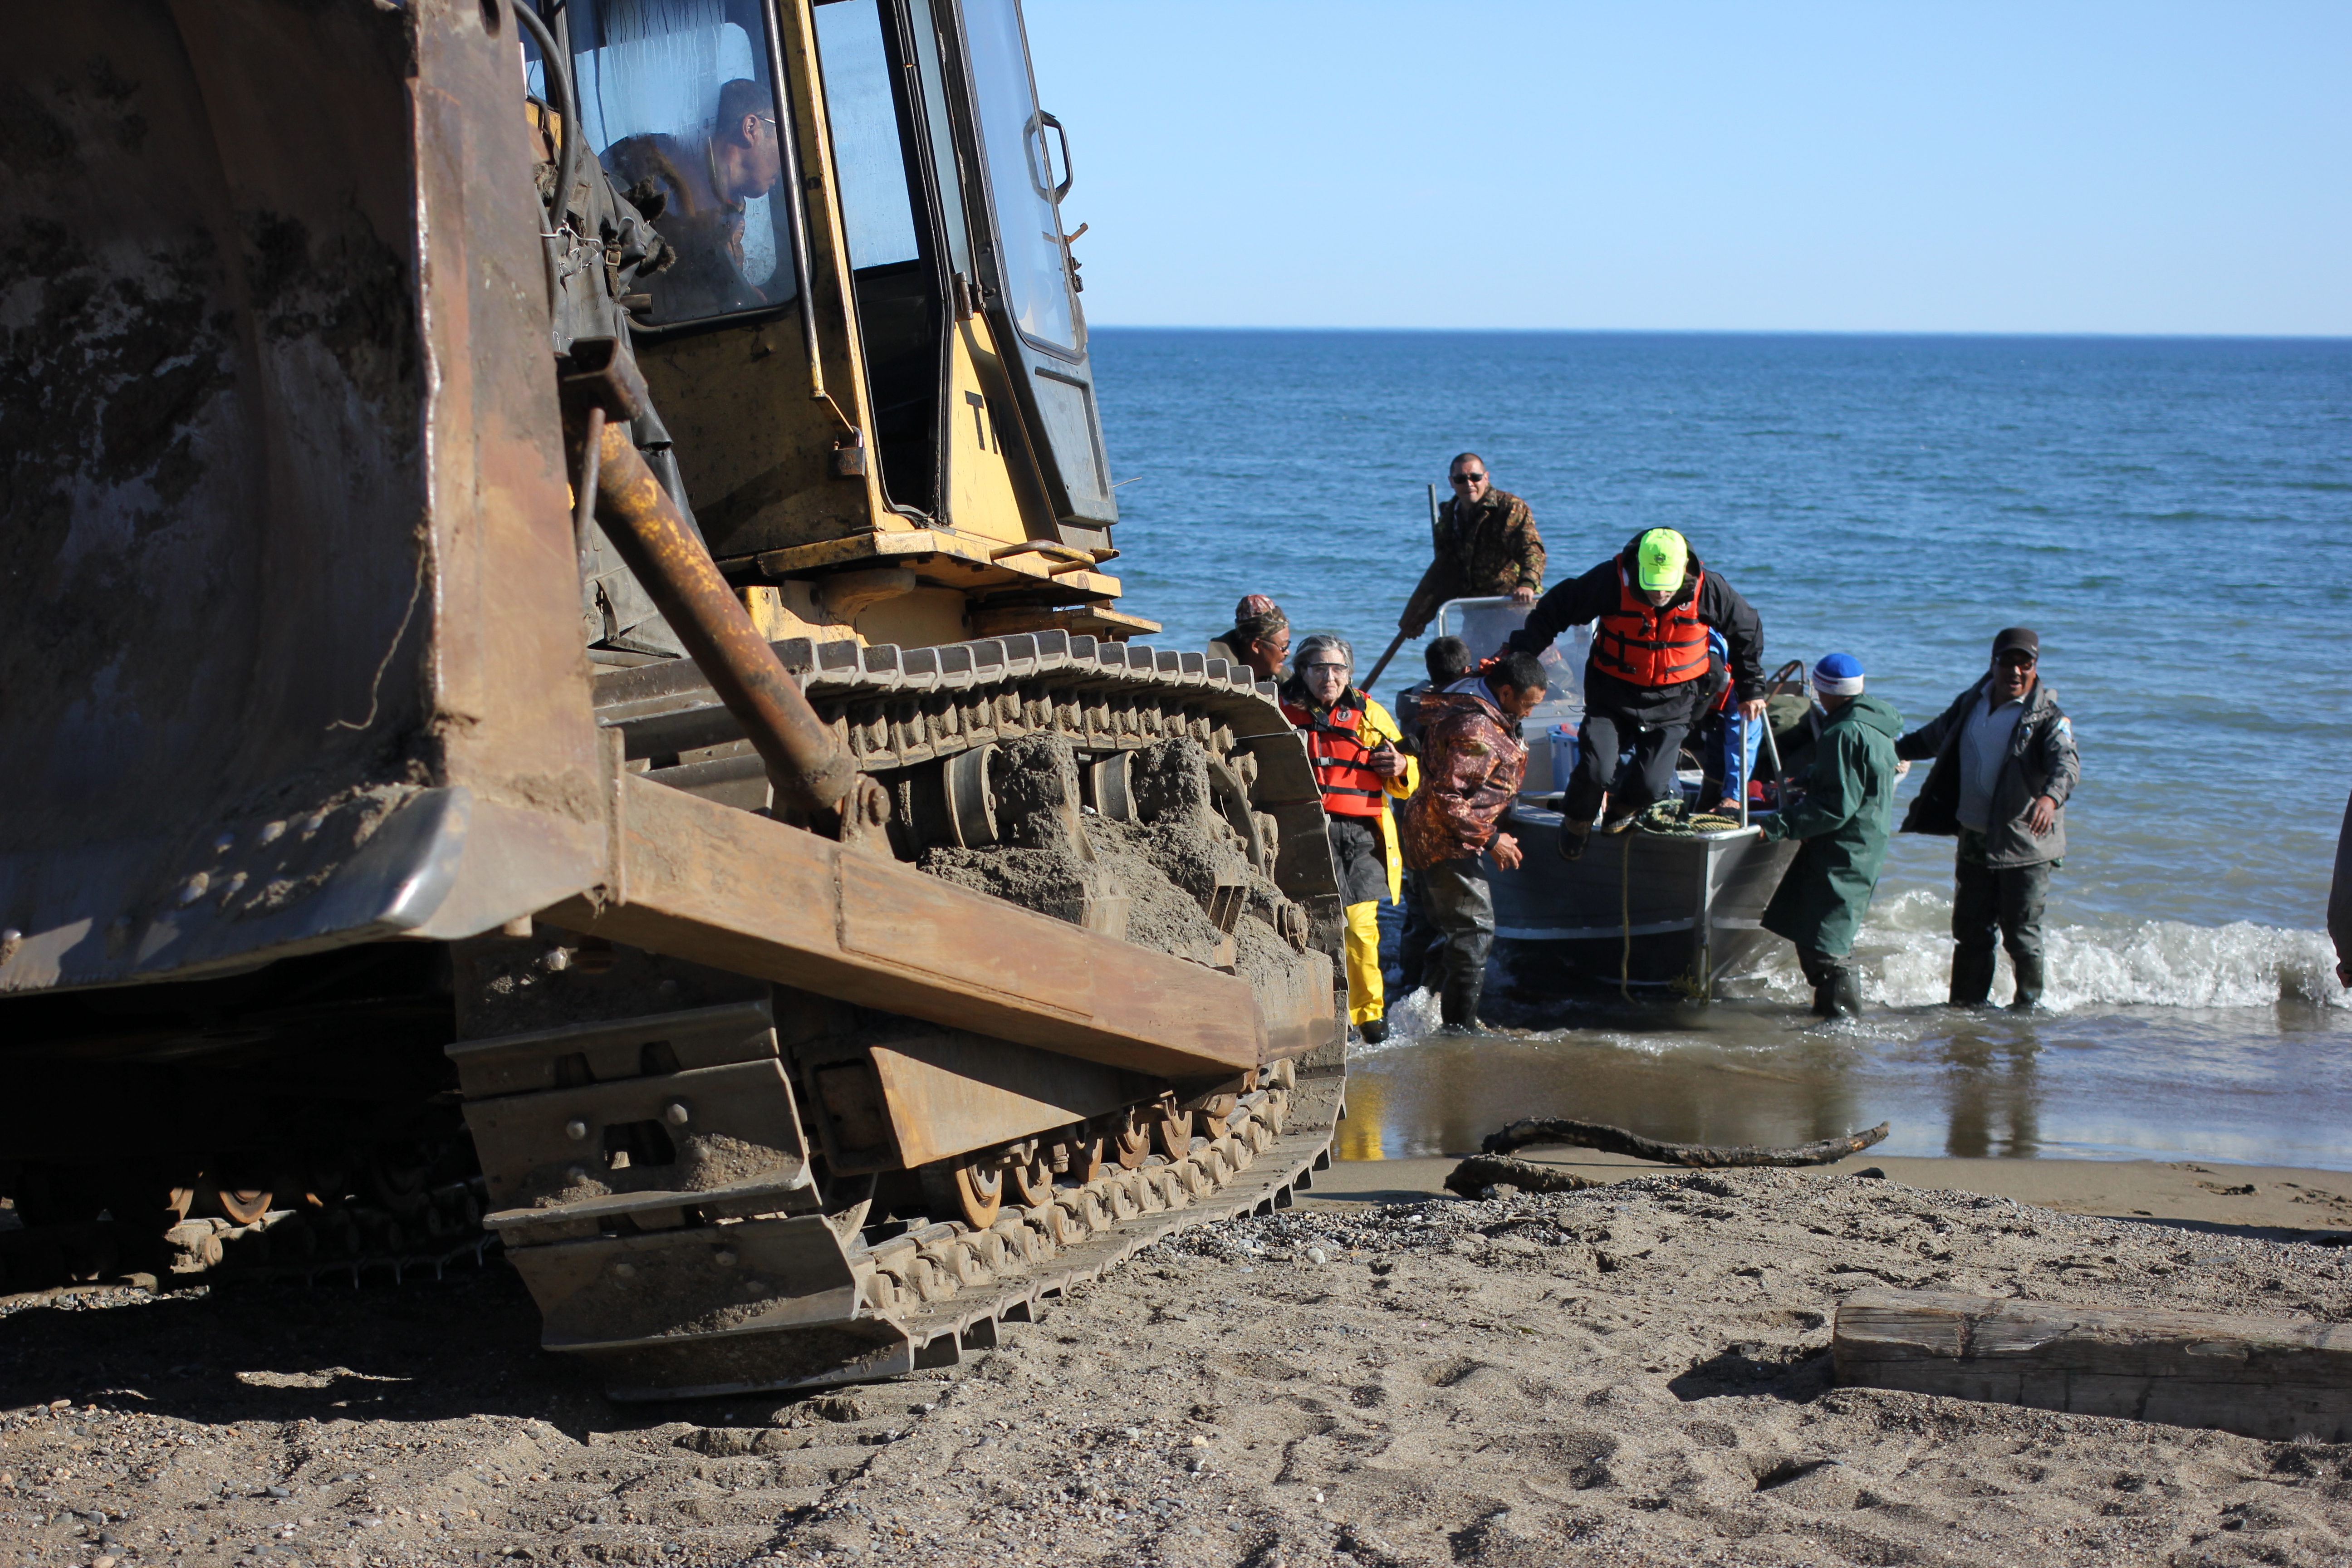 Travelers with the Diomede Island Family Reunion expedition disembark in Lorino, Chukotka in early July 2016. There are no docks, and boats are pulled ashore using a combination of manpower, heavy machinery and whalebone skids. (Kirsten Swann / Alaska Dispatch News)